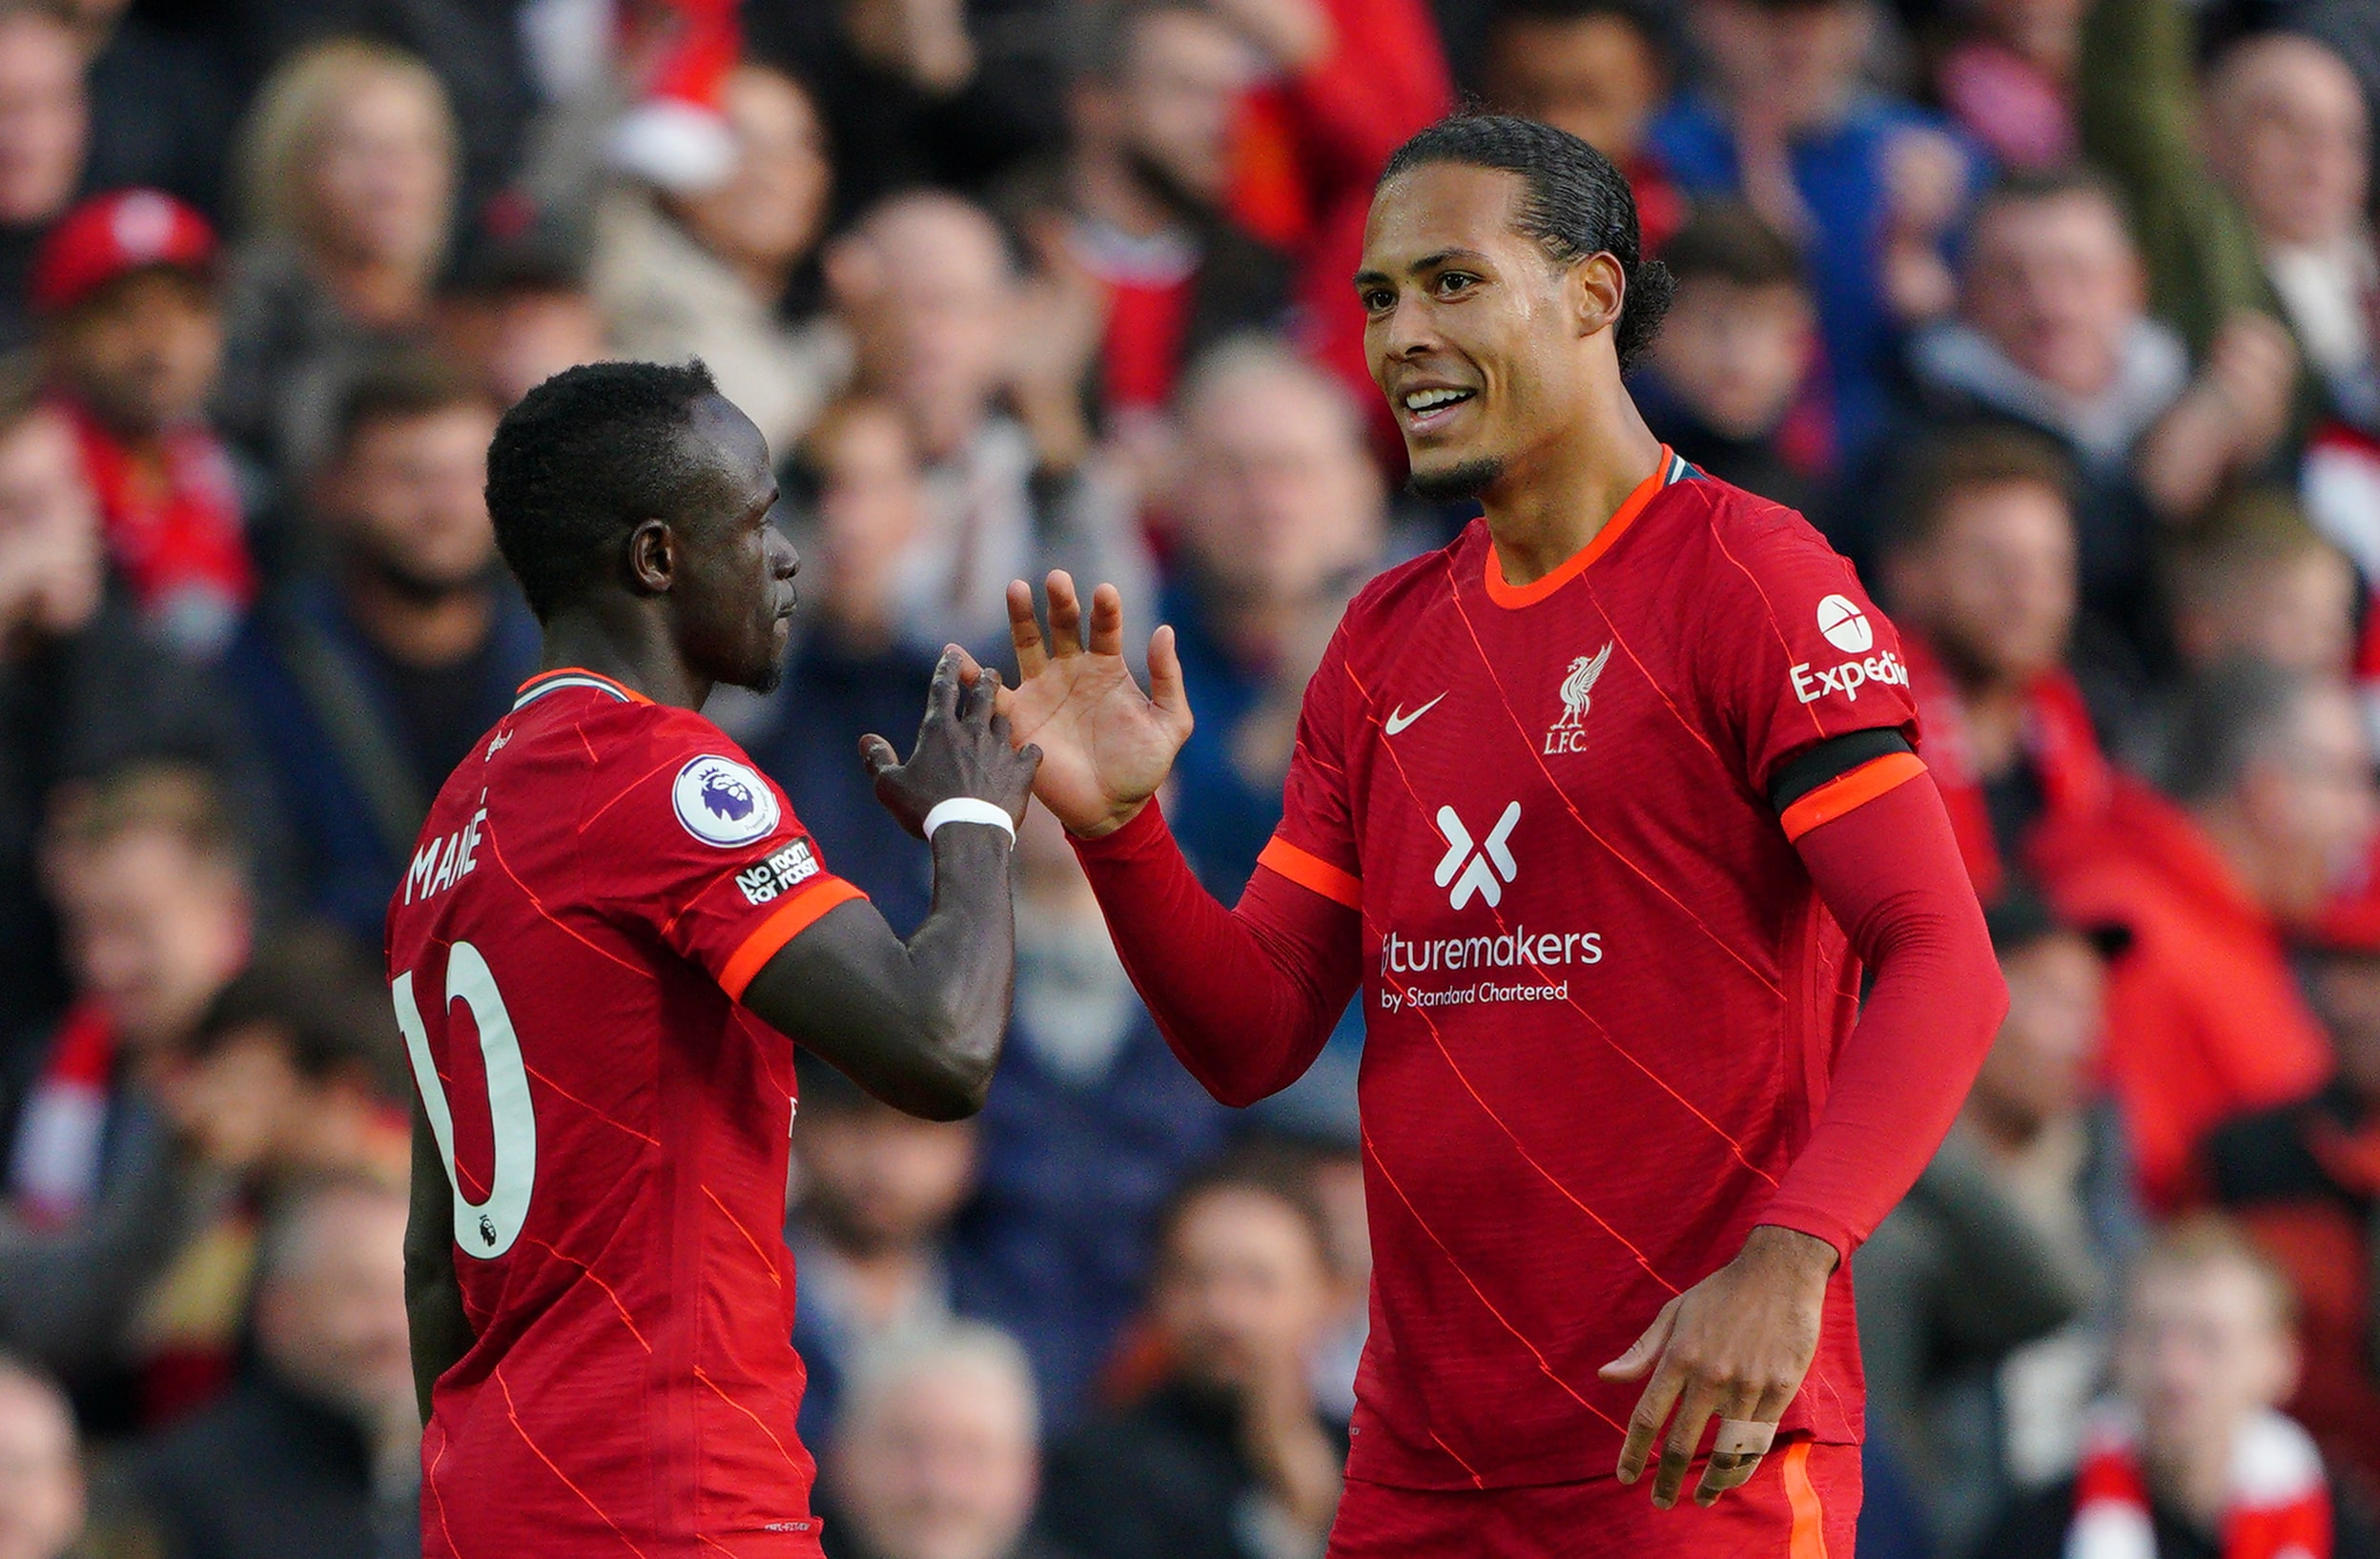 Liverpool's Sadio Mane (left) celebrates with Virgil van Dijk after scoring their side's first goal of the game during the Premier League match at Anfield, Liverpool.